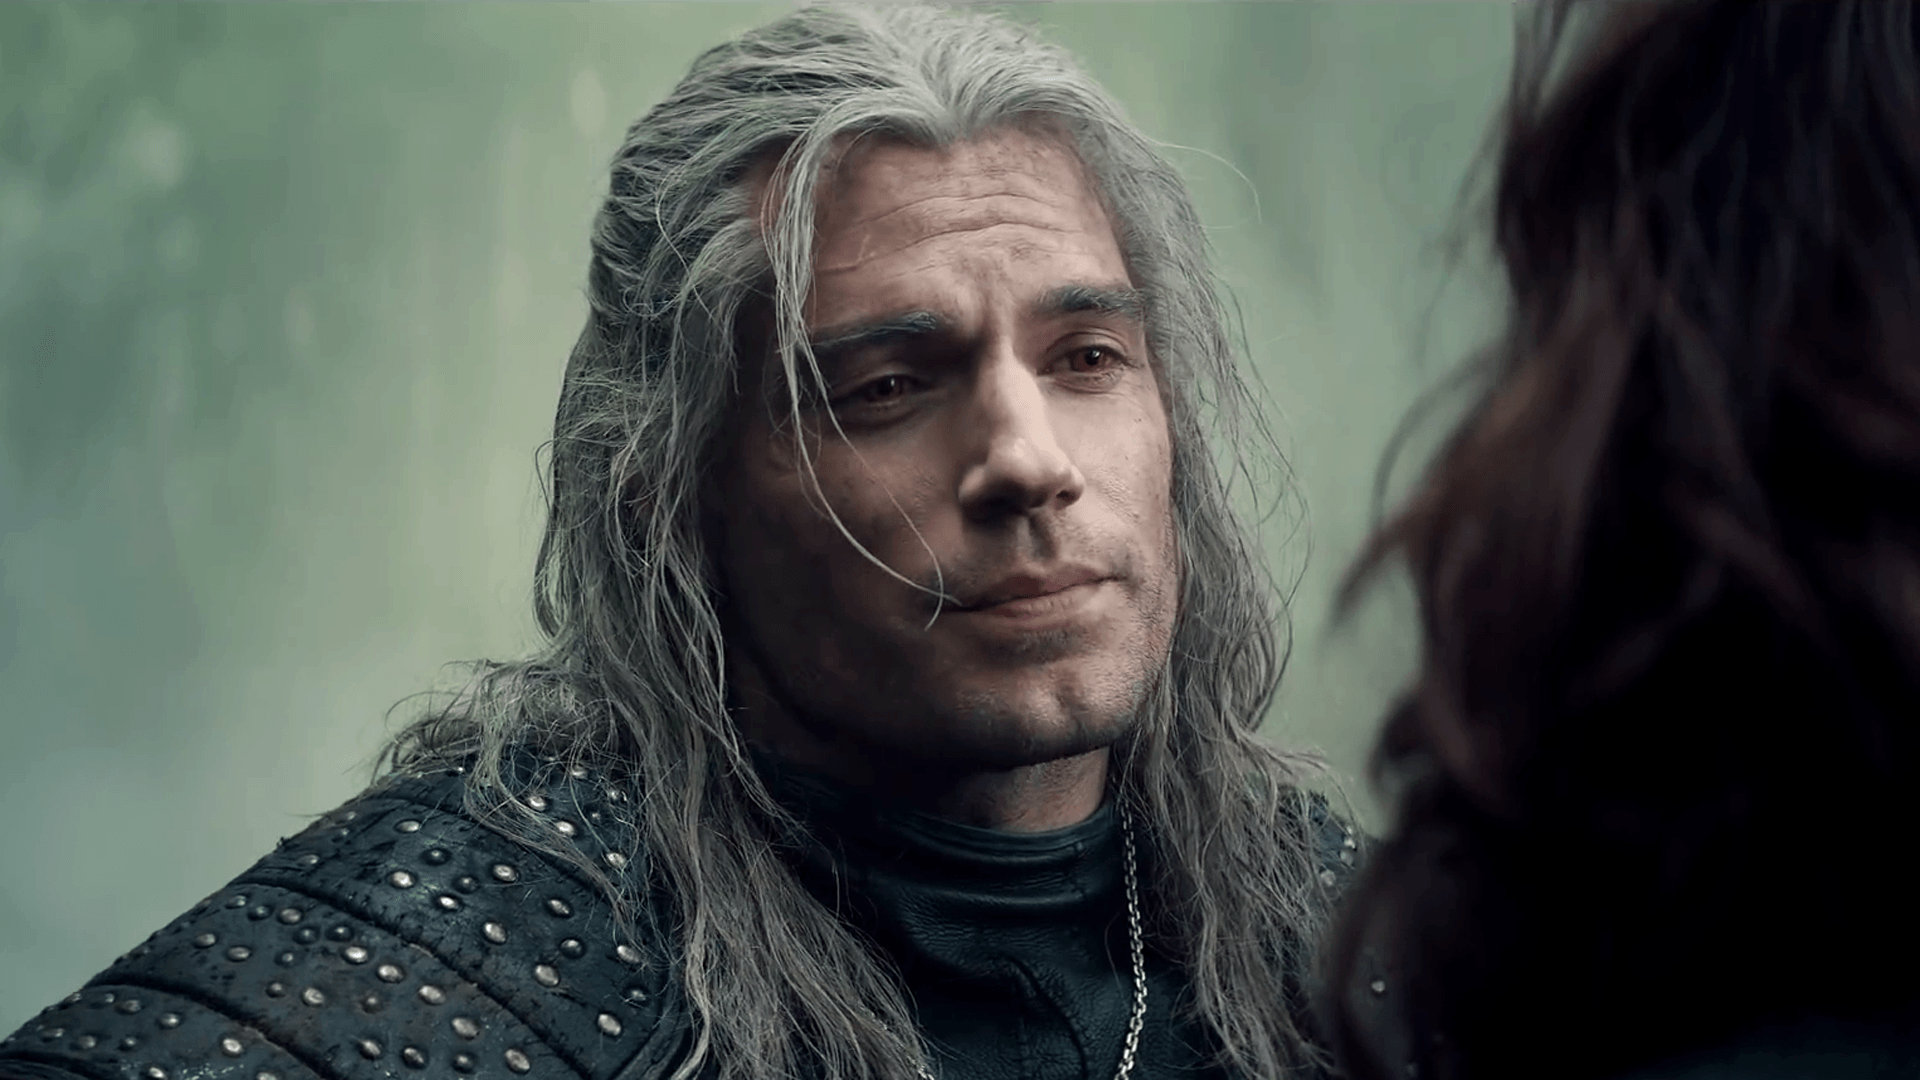 The Witcher Season 2 confirmed for Netflix